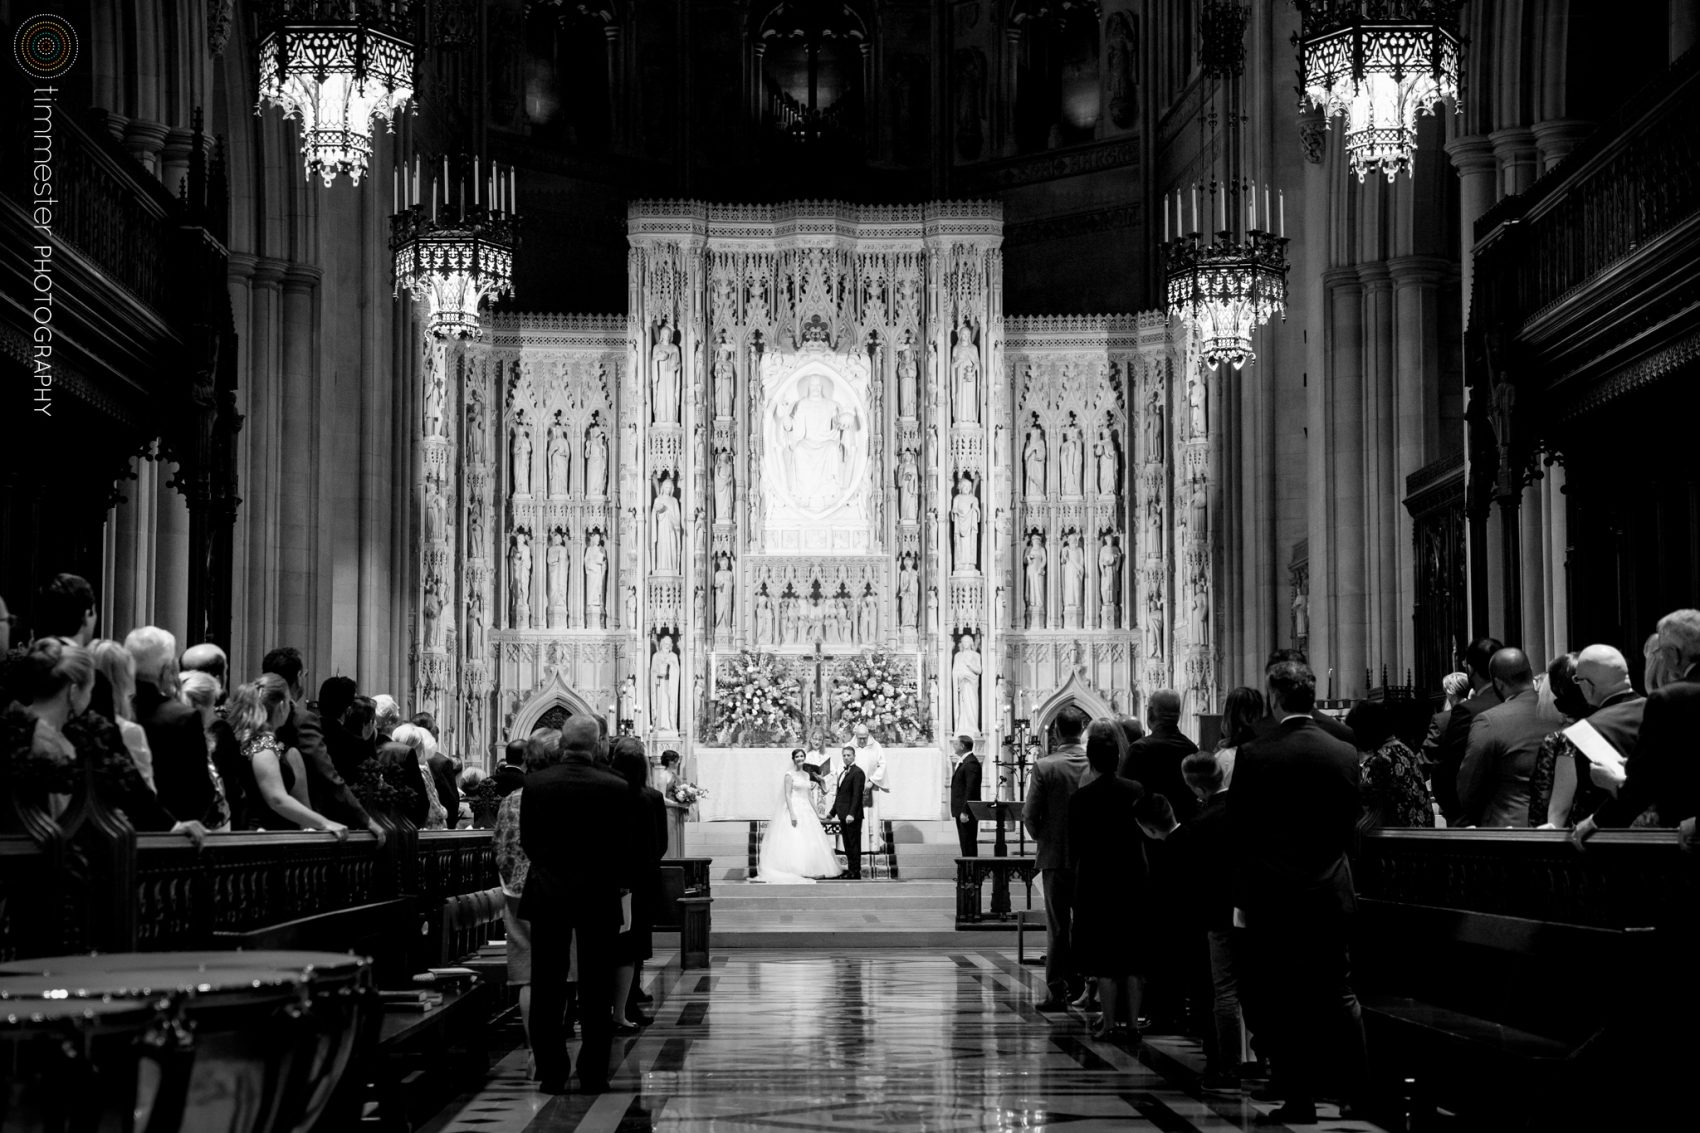 A District of Columbia wedding at the Washington National Cathedral.